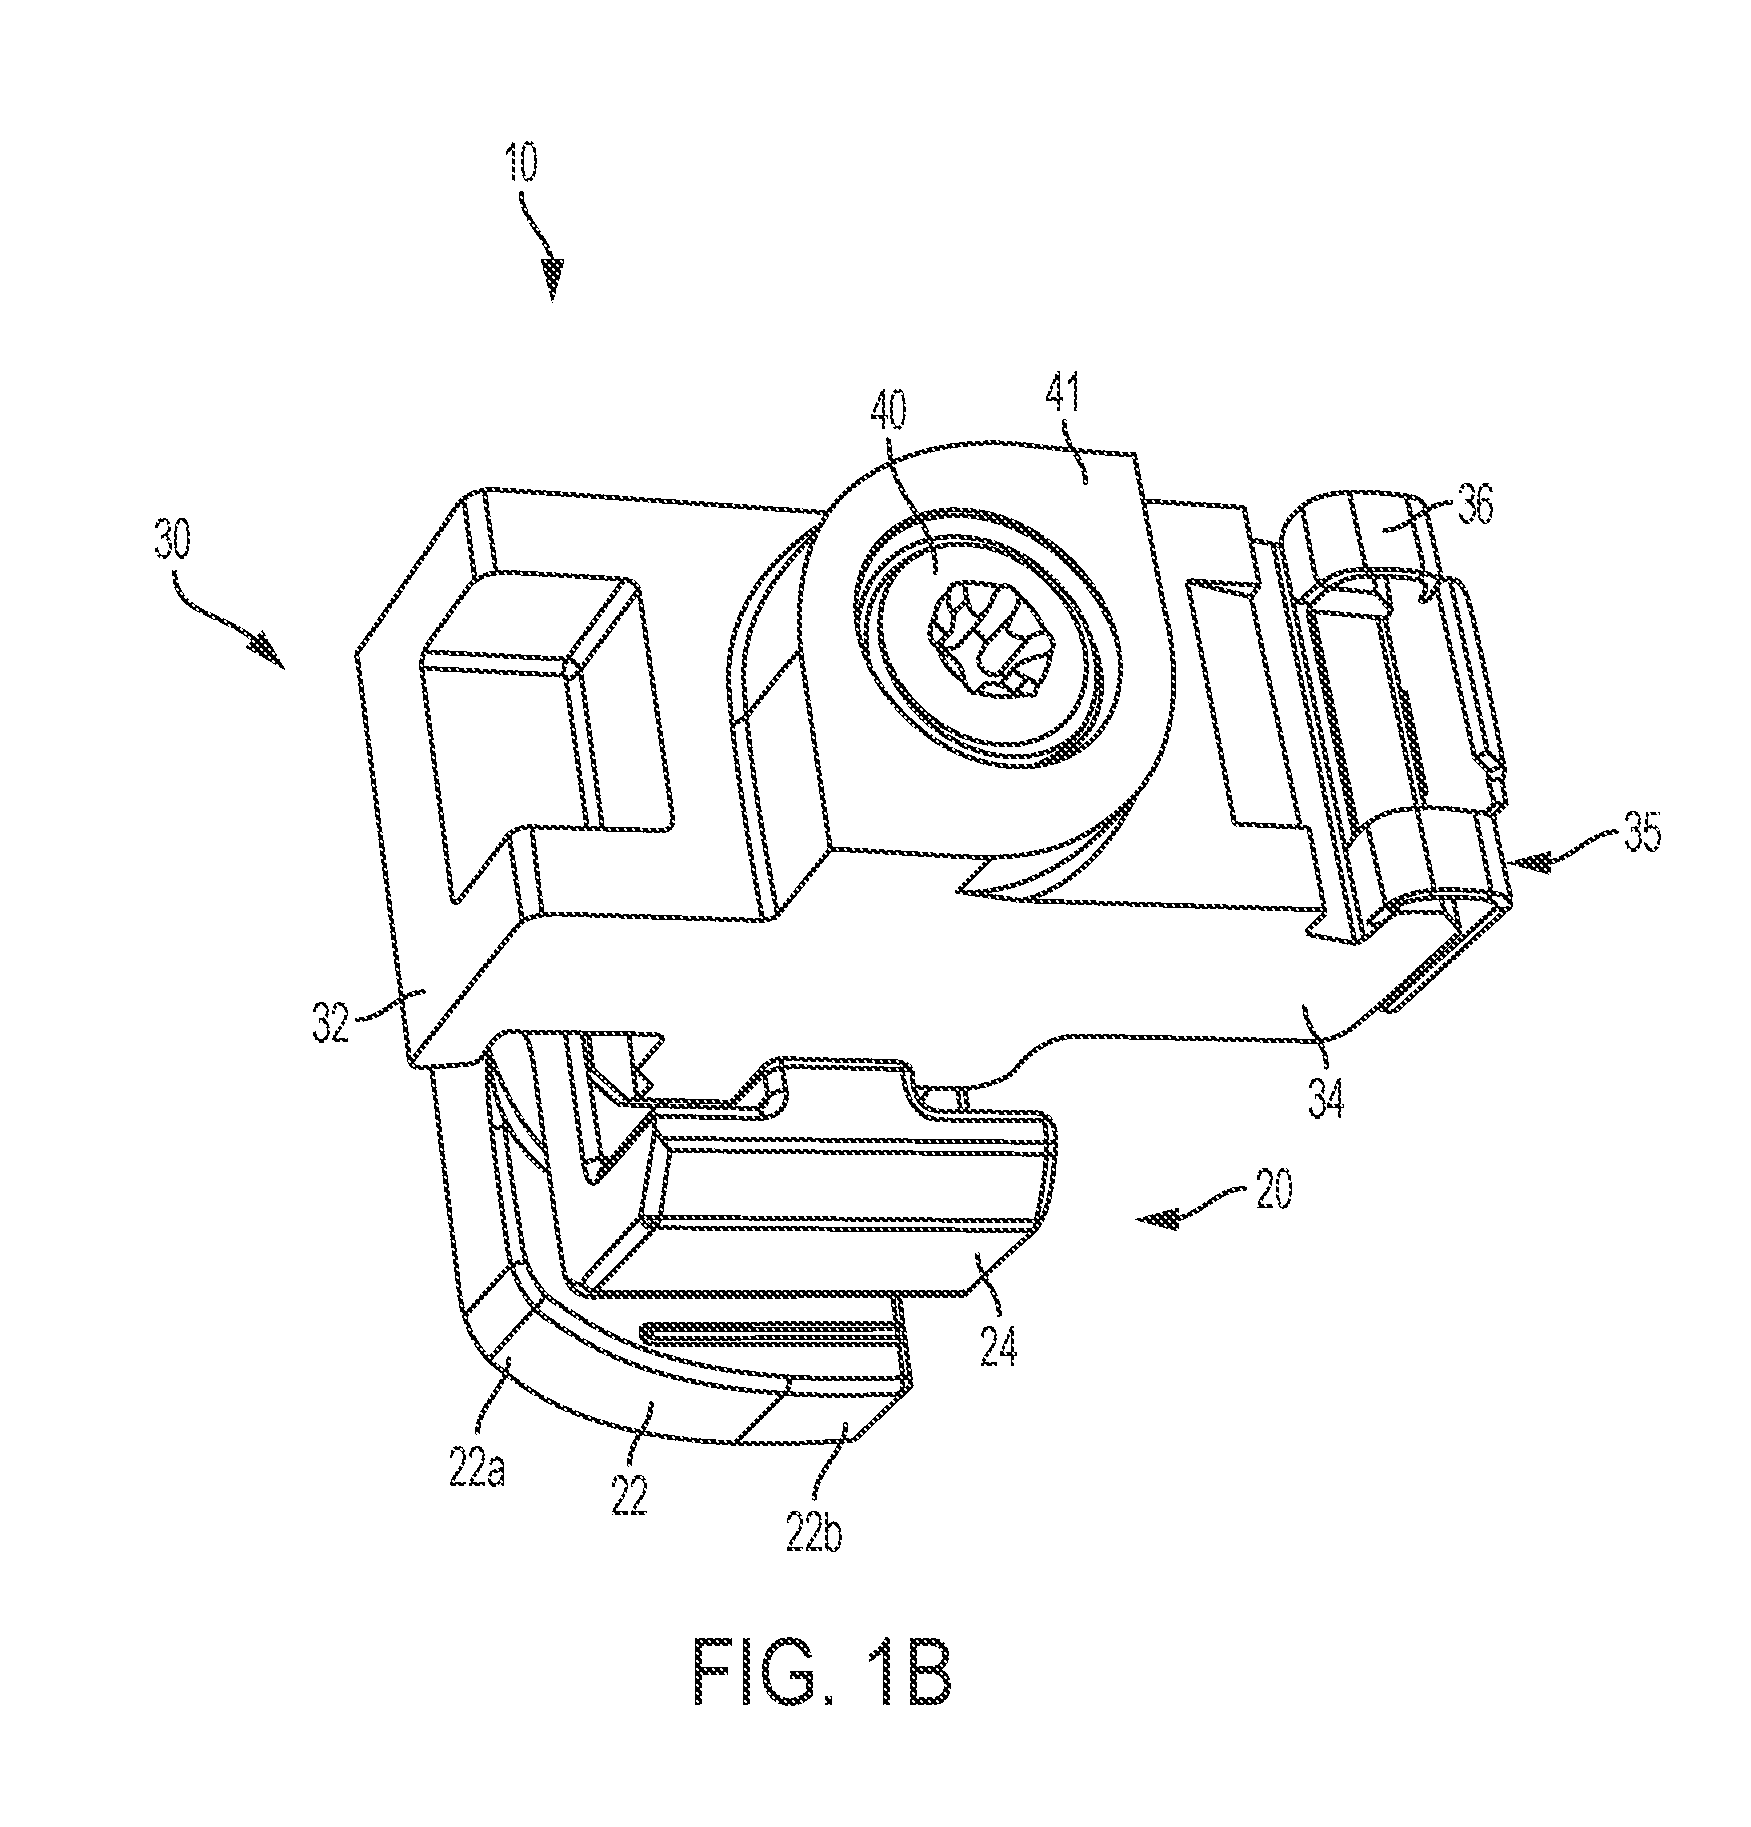 Photovoltaic mounting rail connector with drop-down connection to first photovoltaic module and slide-in connection to second photovoltaic module